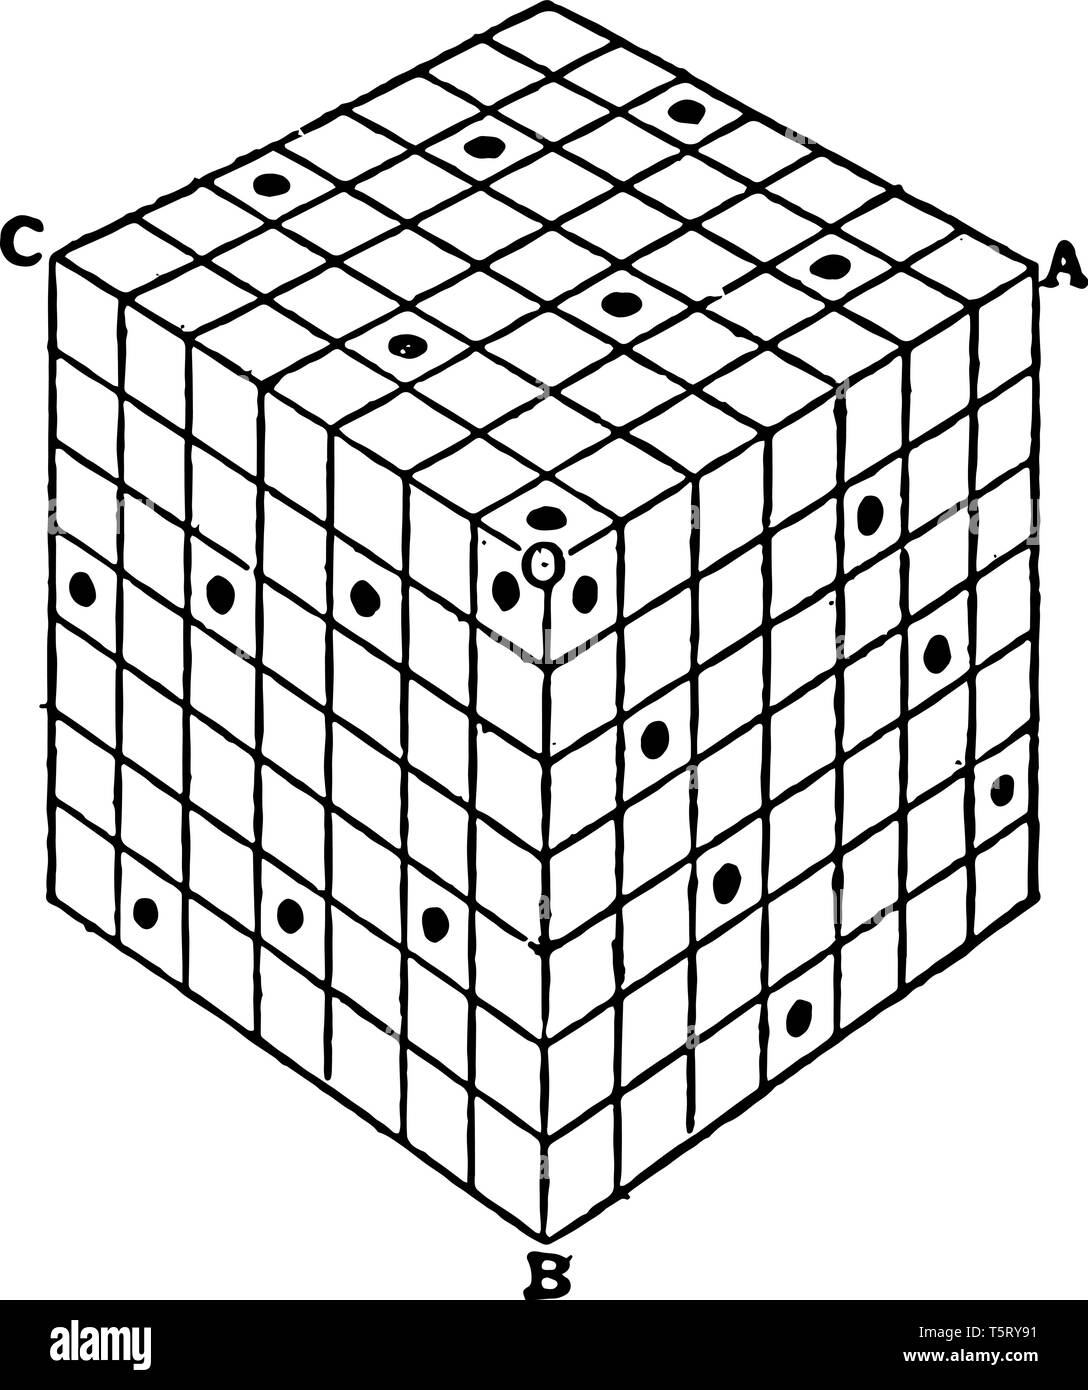 The image shows the Nasik Cube. Its various sections have the same unique properties and is also called magic hypercube, vintage line drawing or engra Stock Vector